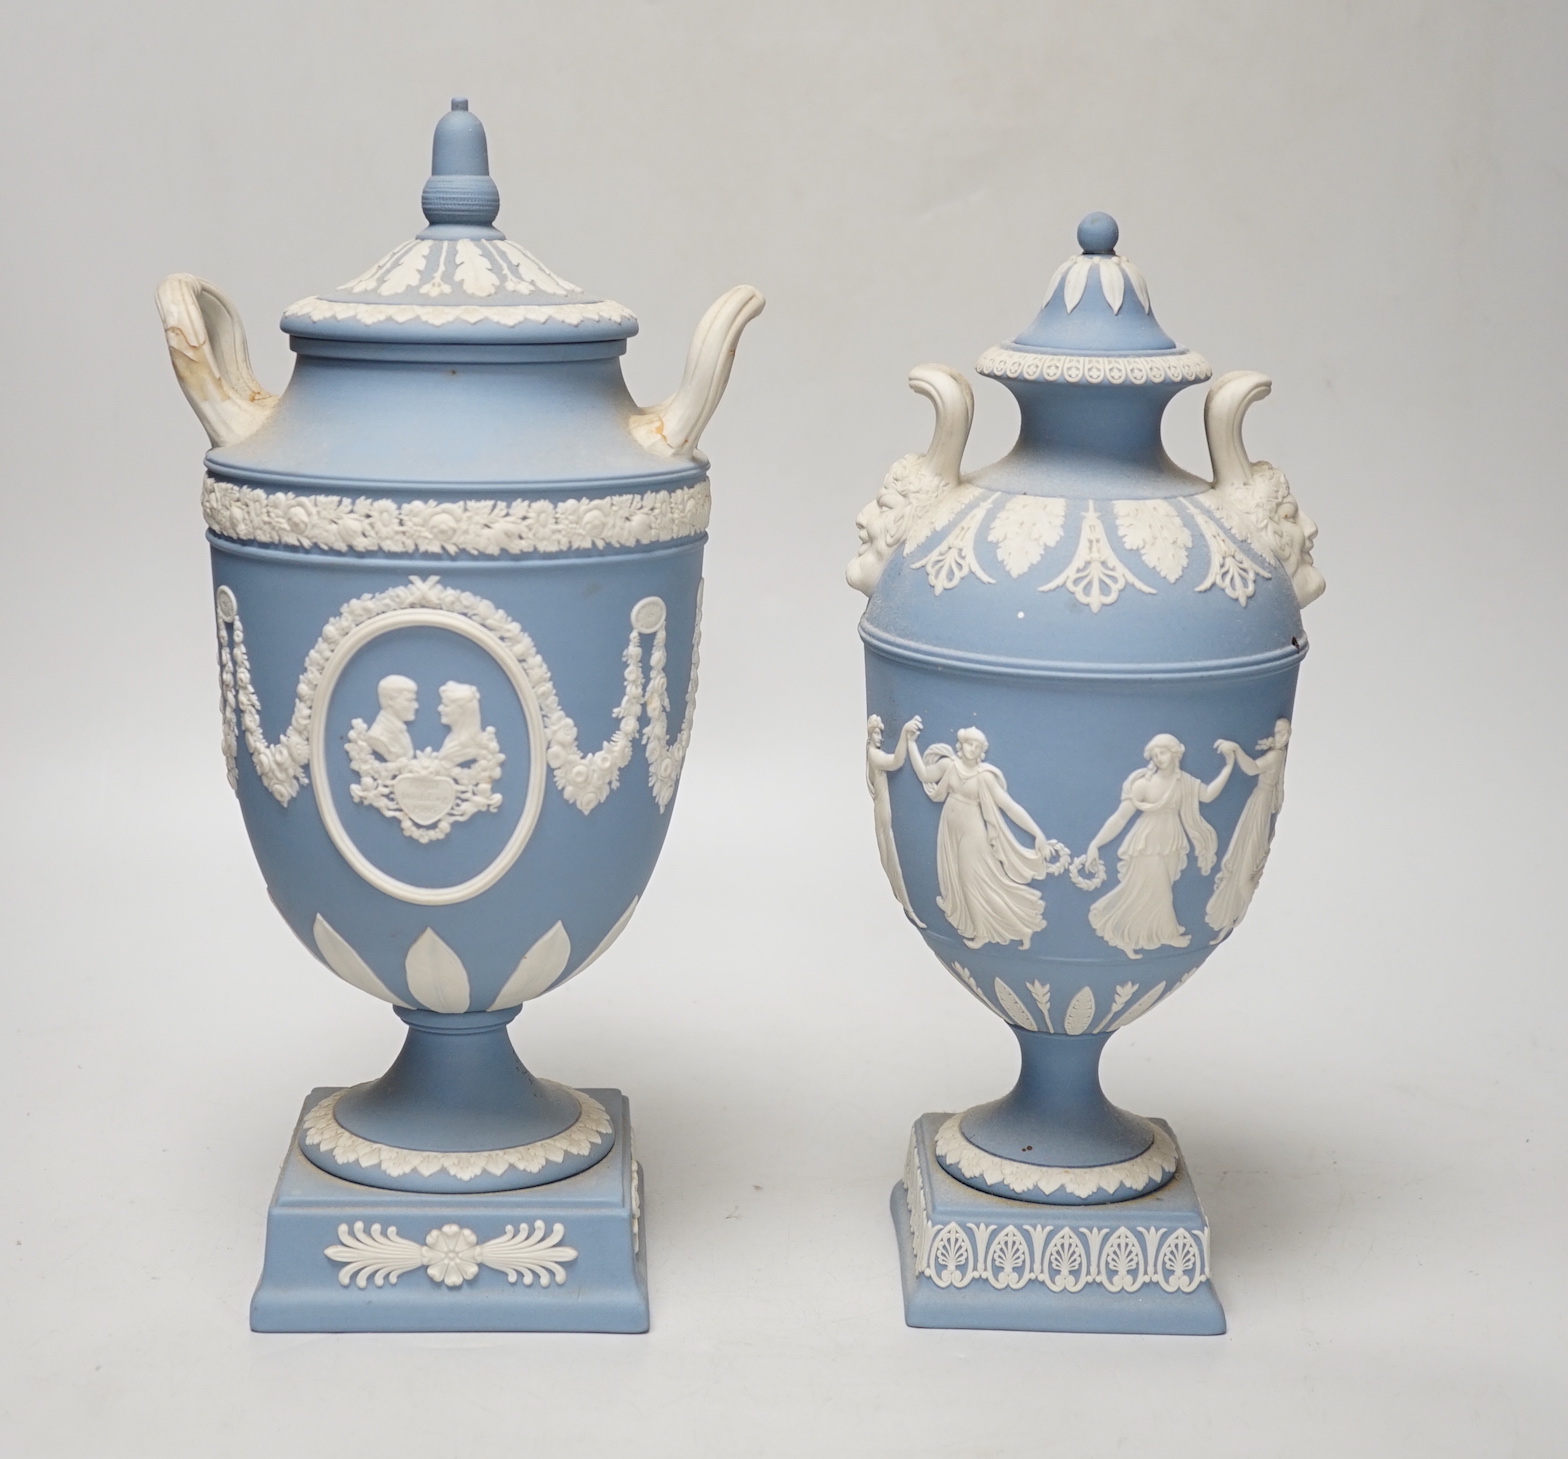 A Wedgwood blue jasper commemorative urn and cover and a similar smaller urn and cover, tallest 31cm